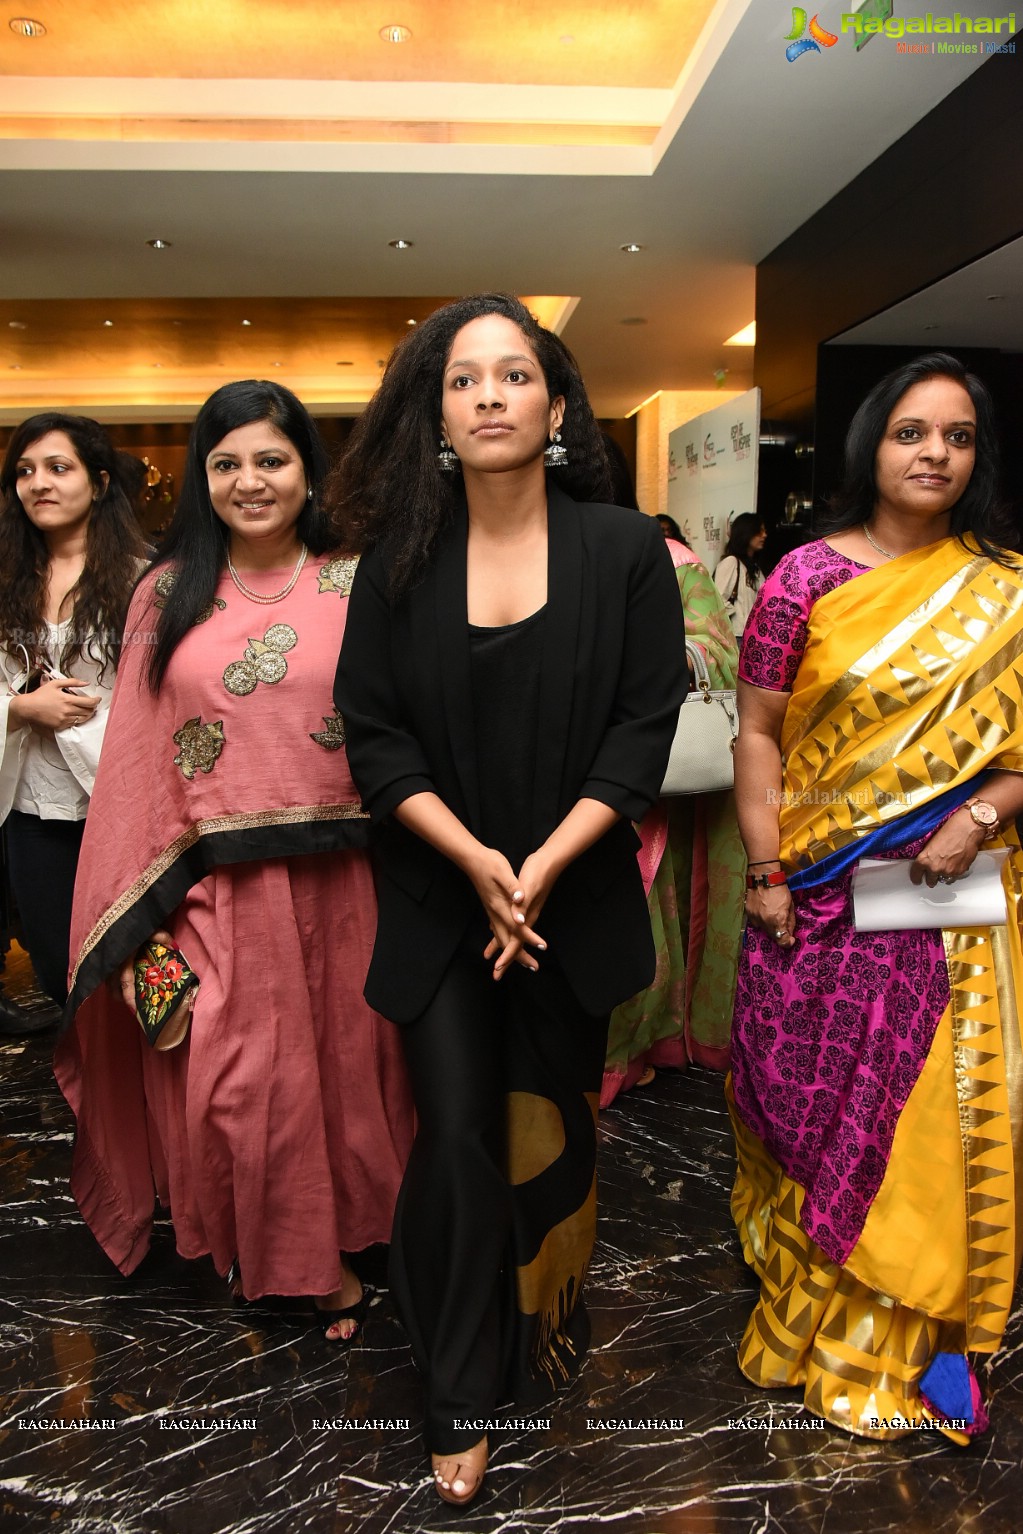 FICCI - An Interactive Session “Design Your Personality” with Masaba Gupta at Park Hyatt